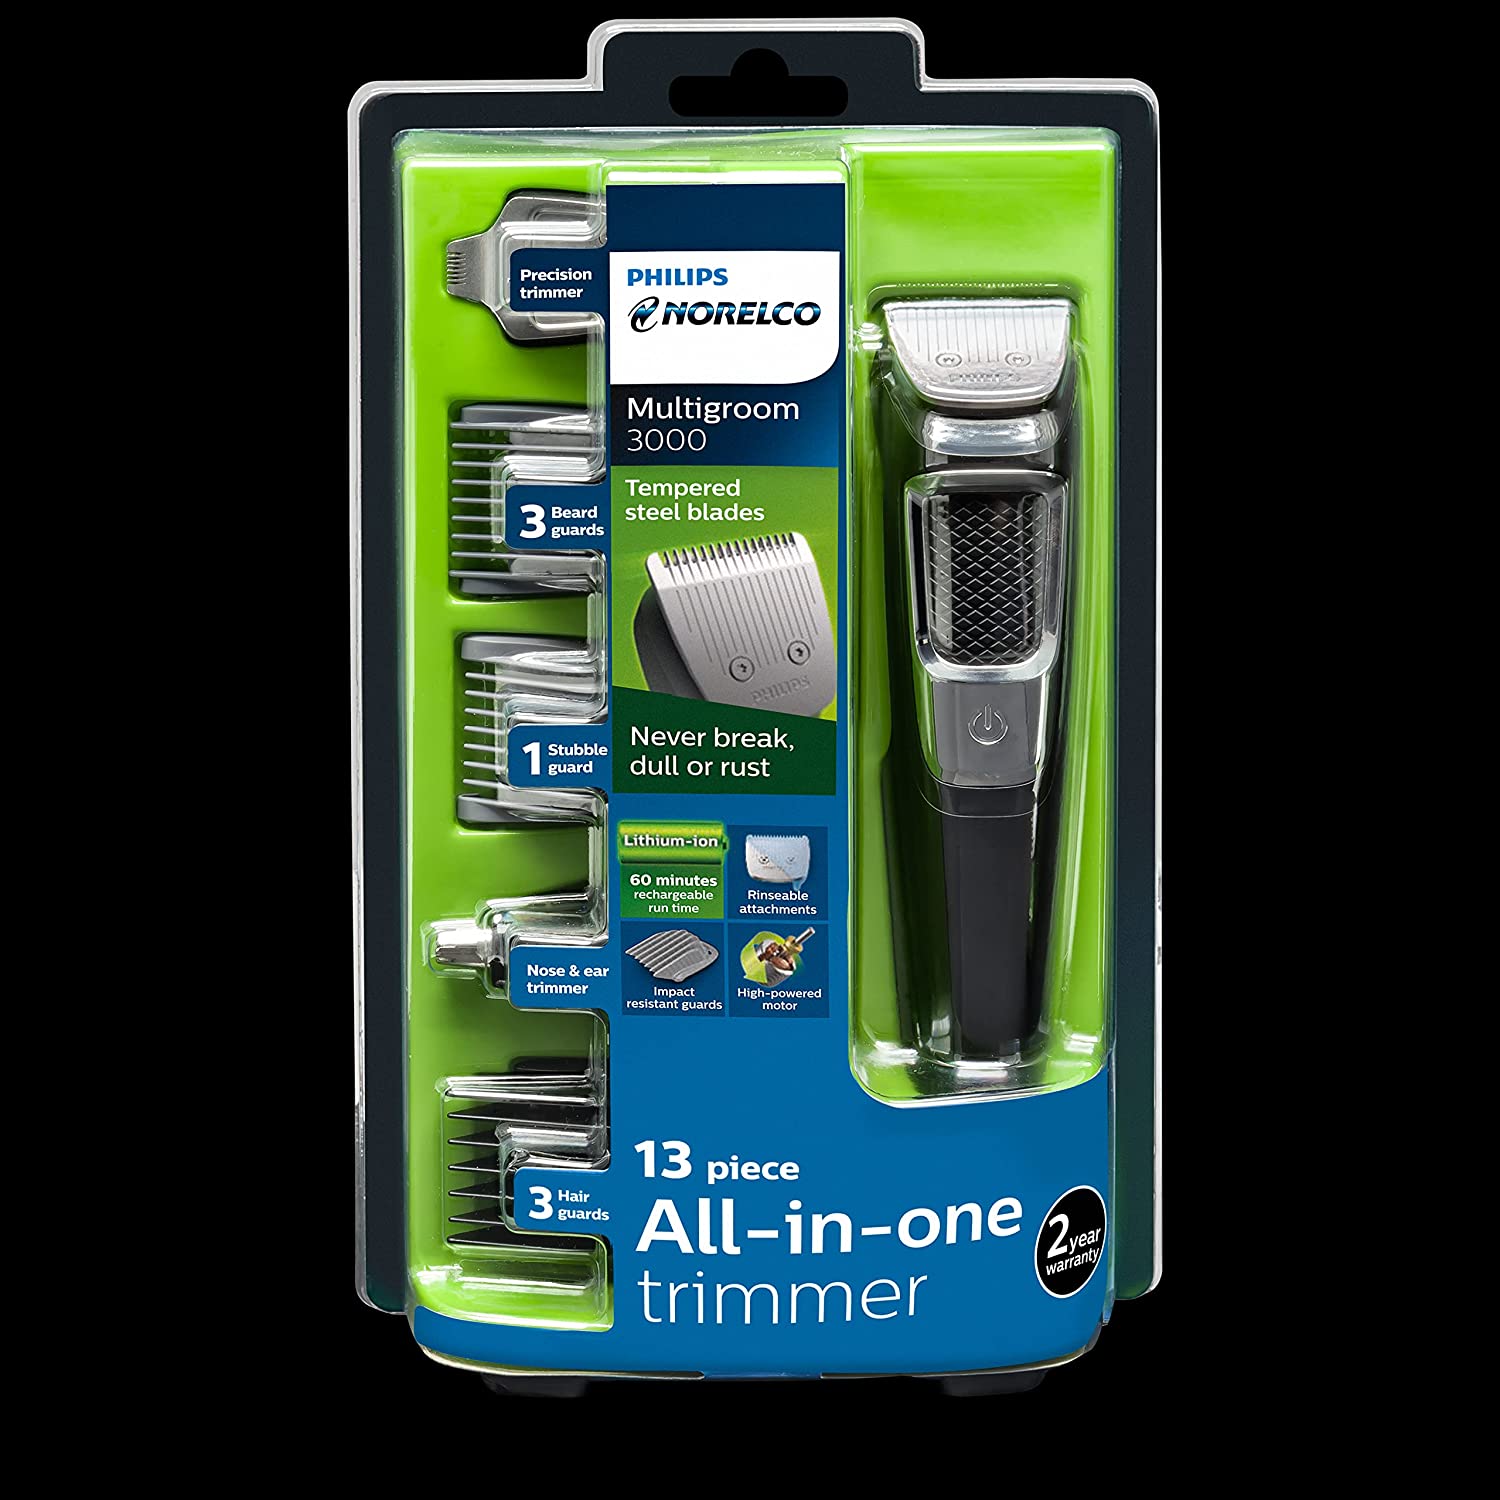 Philips Norelco 3000, Trimmer Multigroomer Series All-in-One 13 Piece